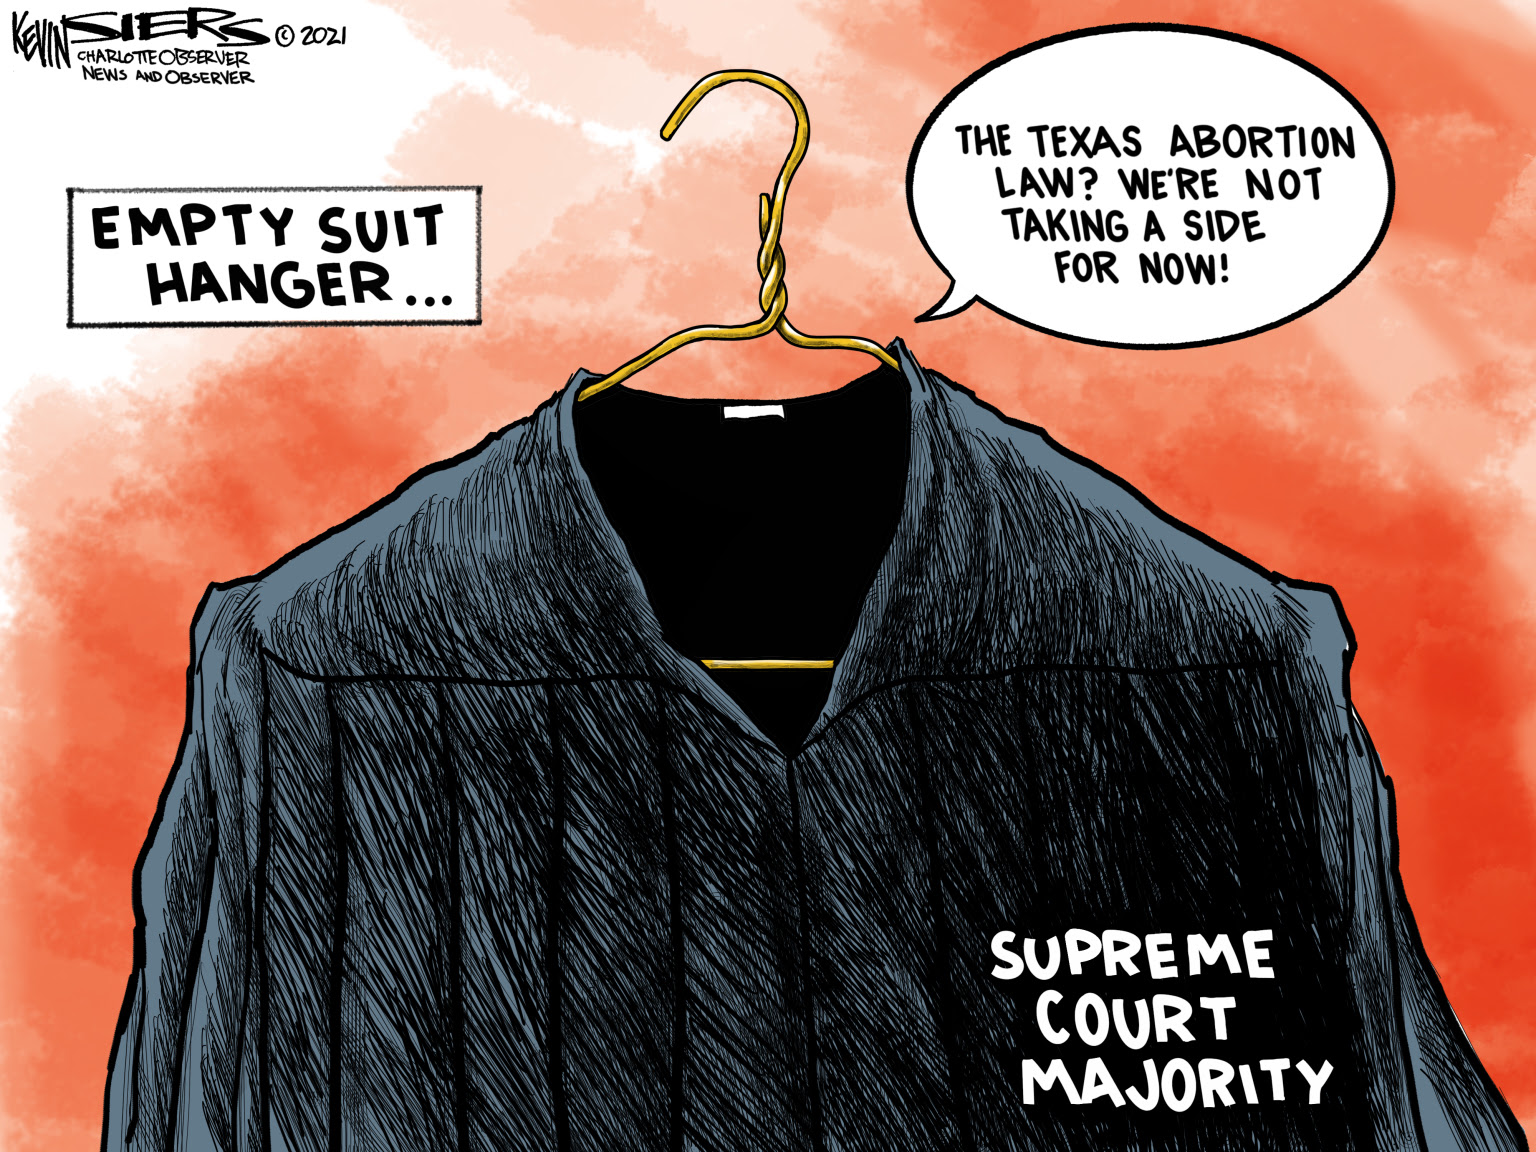 McConnell stacked Supreme Court approves Texas abortion law.